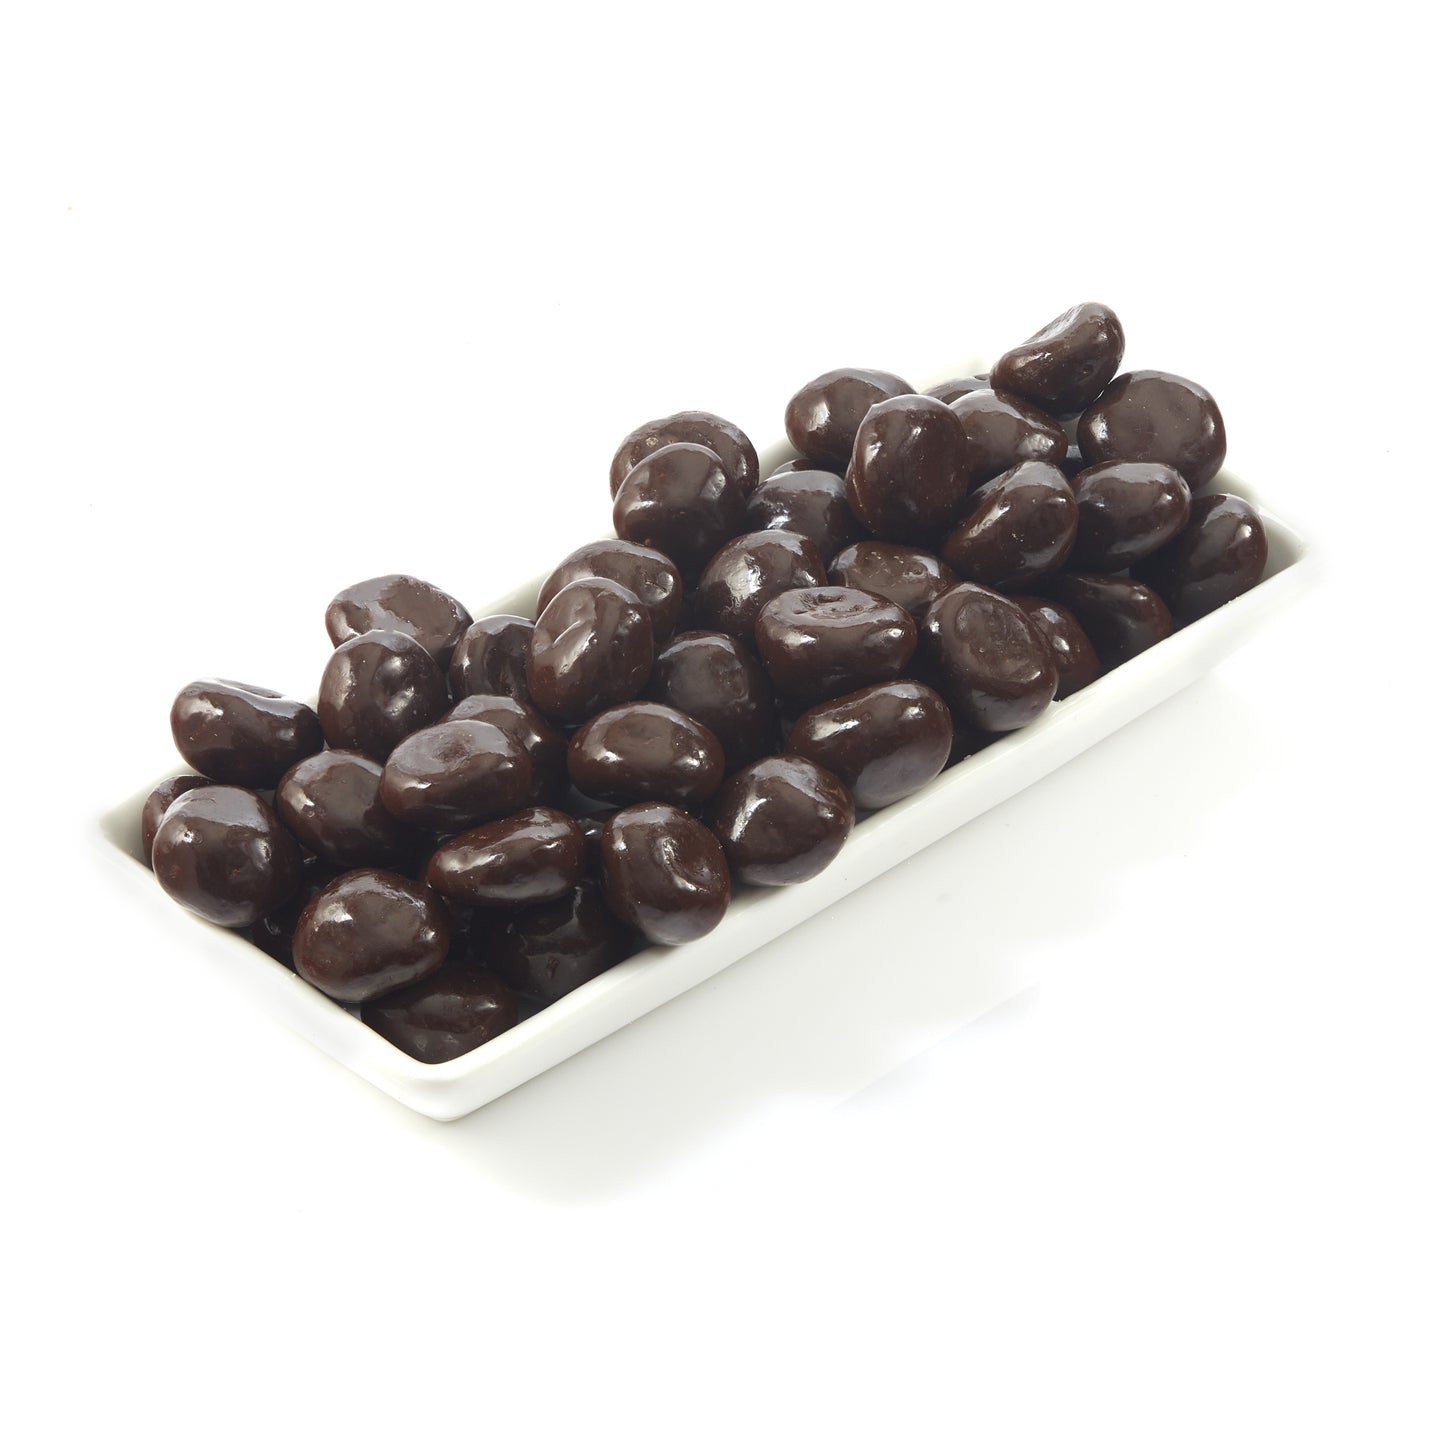 Chocolate Covered Mocha Beans